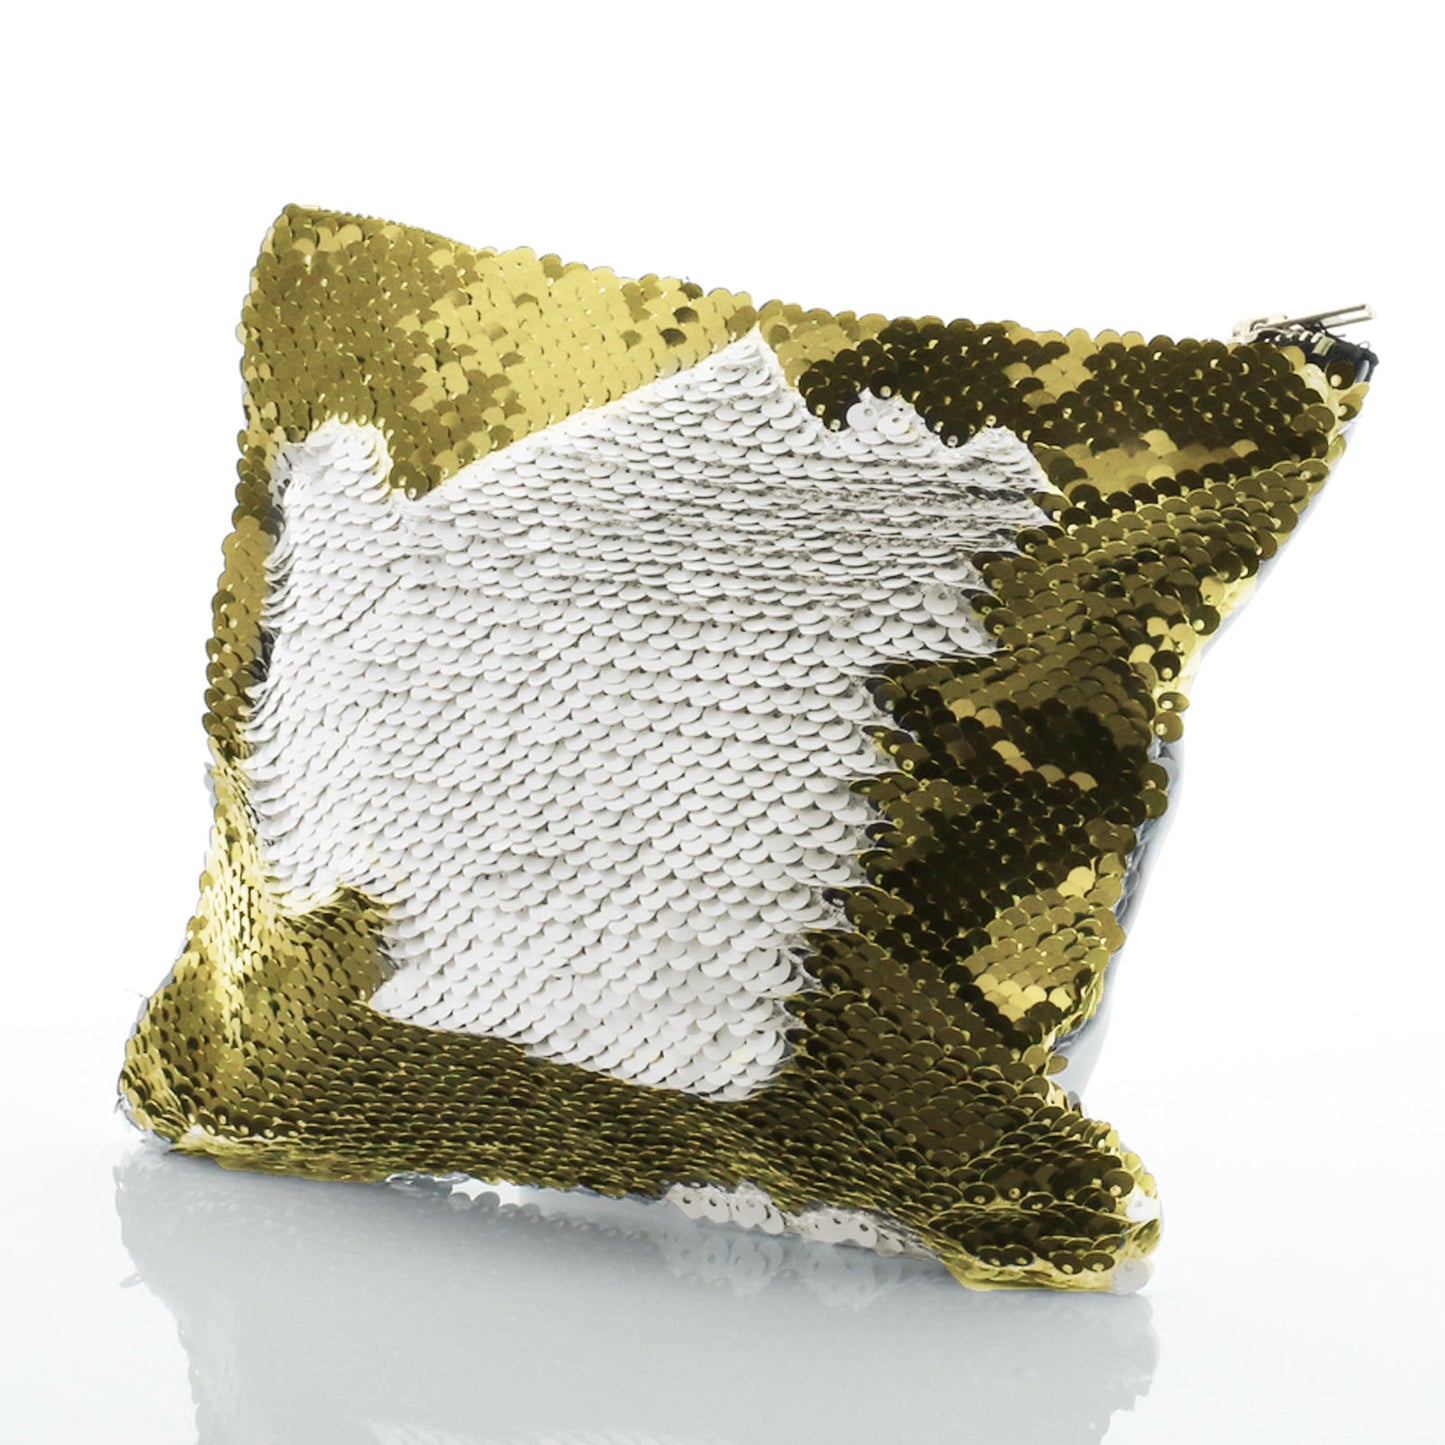 Personalised Sequin Zip Bag with Brown Owl Yellow Flowers and Cute Text